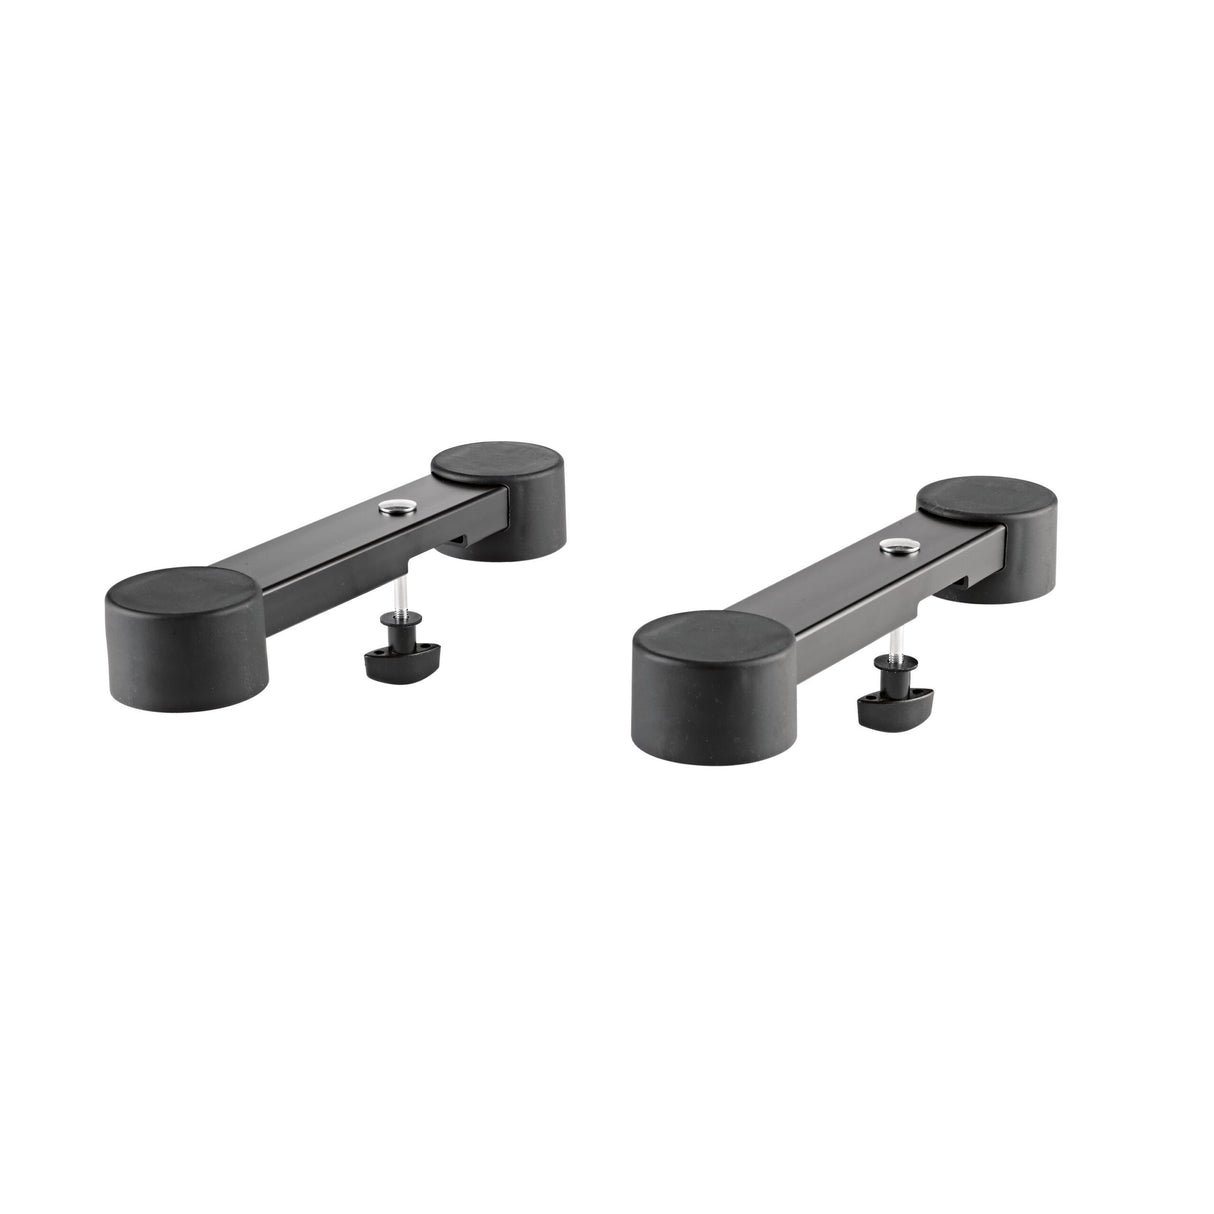 K&M 18827 Digital Piano Support Arms for Omega Stands, Black